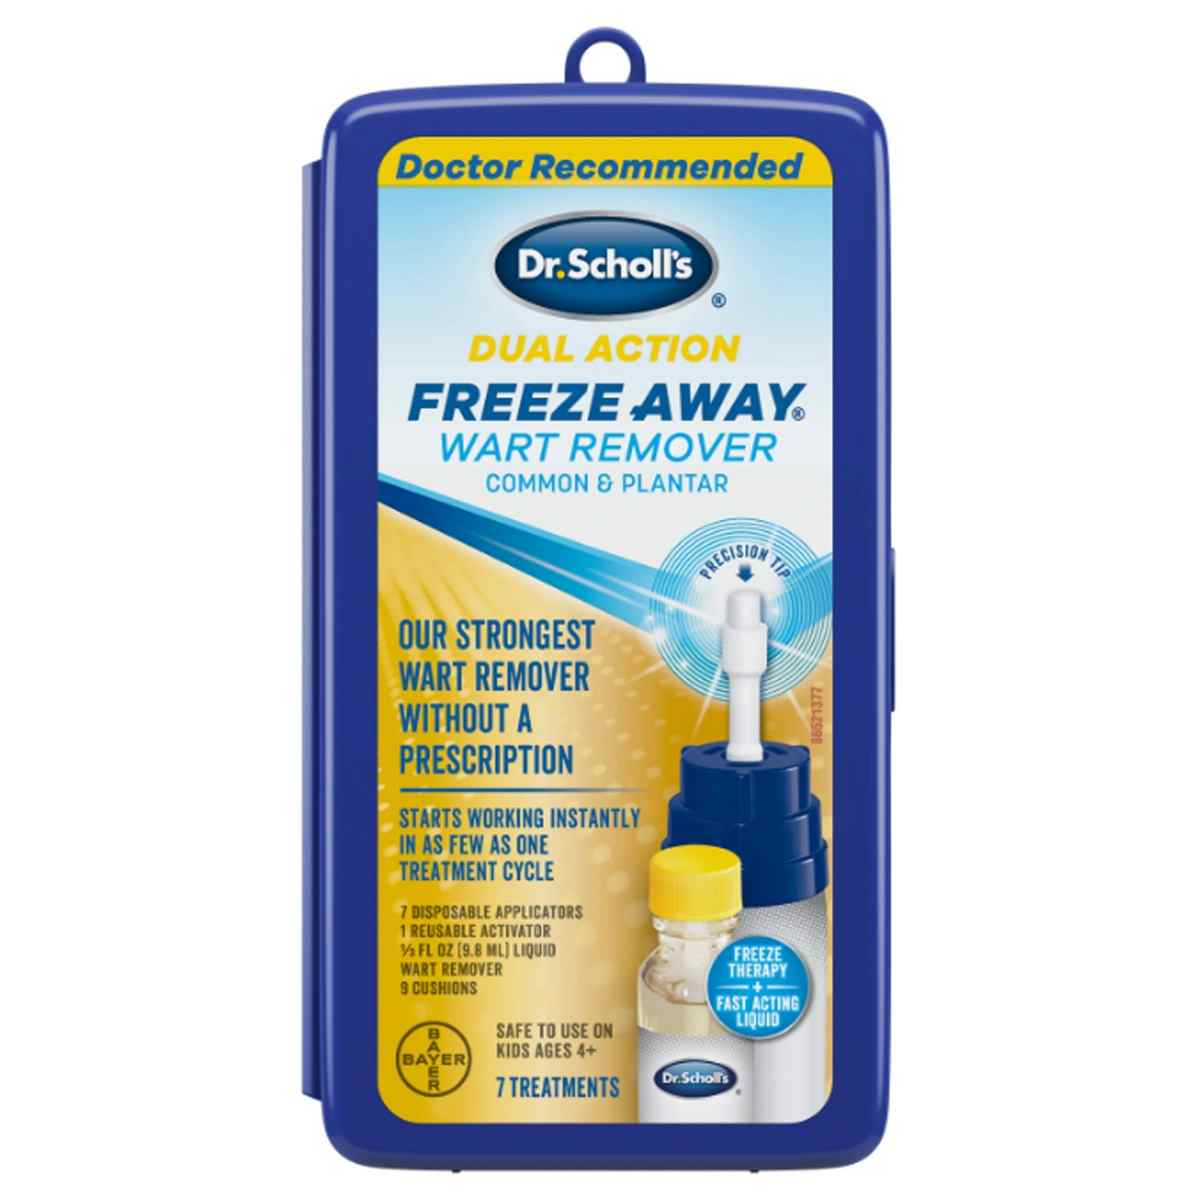 Dr. Scholl's Dual Action Freeze Away Wart Remover Kit, 86591820, 1 Each